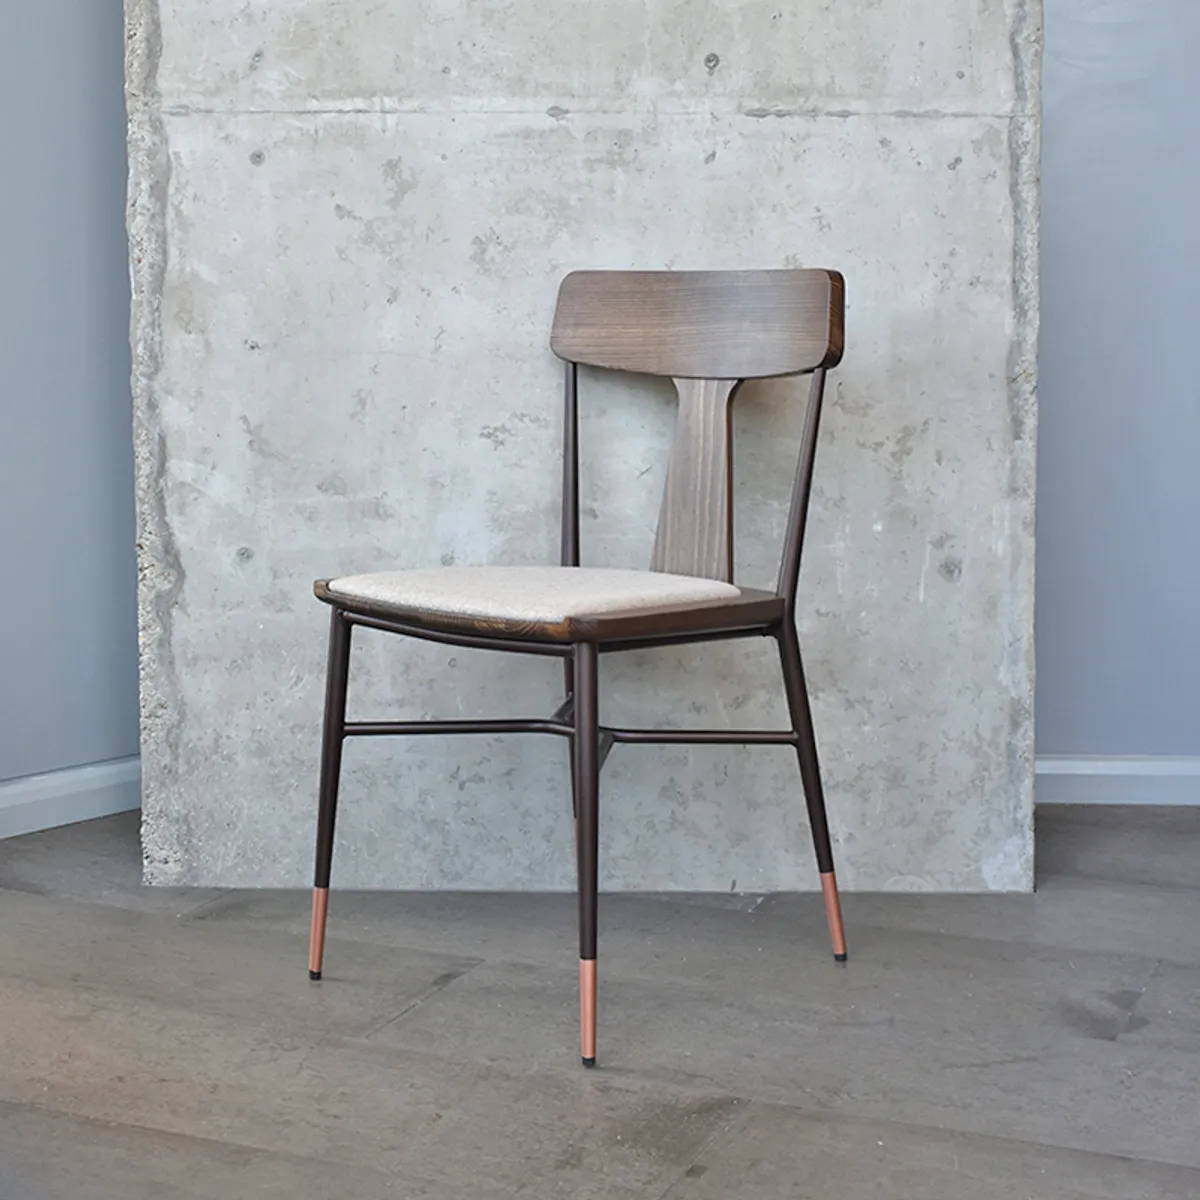 Agatha 3 Chair New Furniture From Milan 2019 By Inside Out Contracts 020